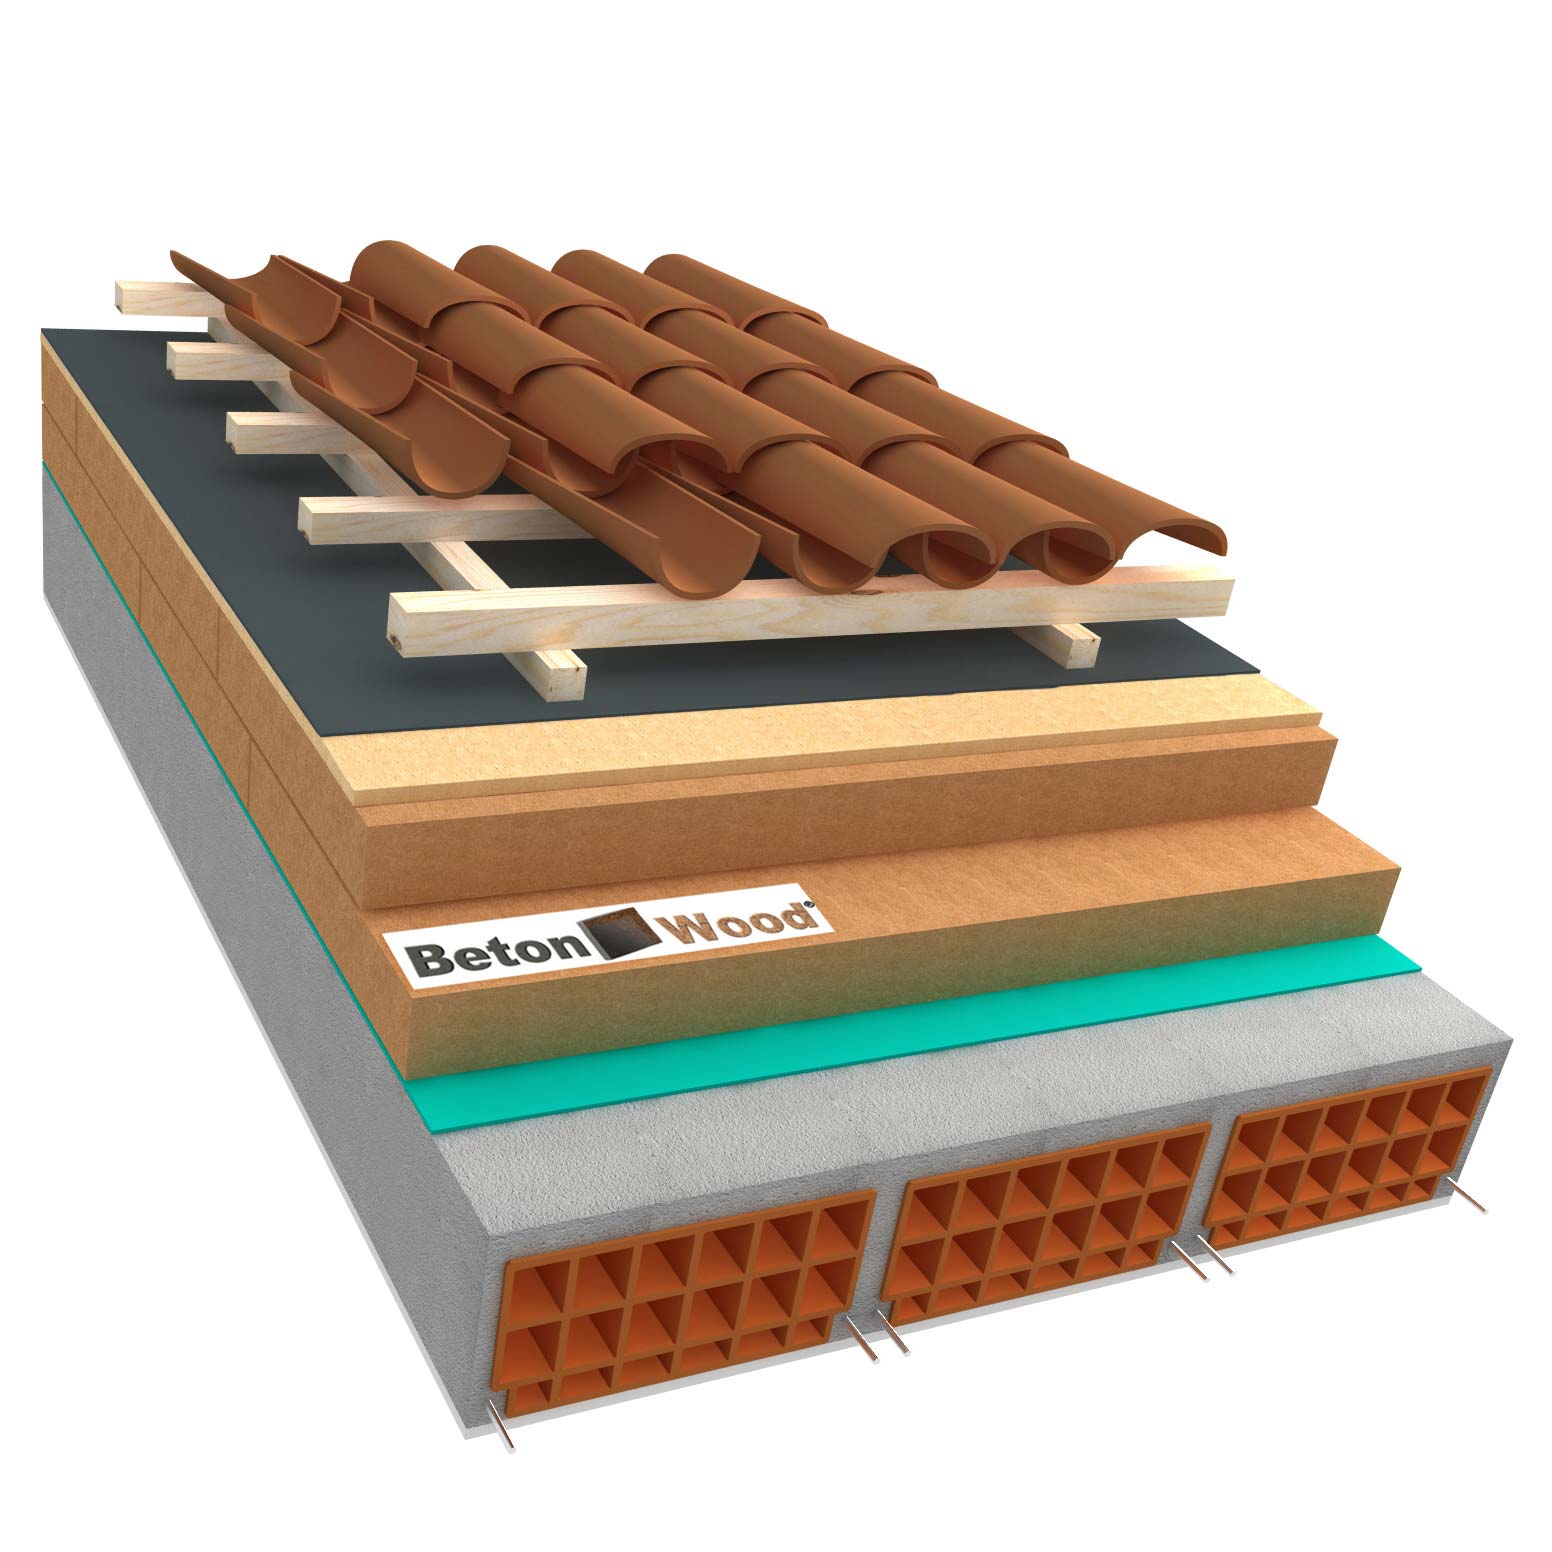 Ventilated roof with wood fiber Isorel and Special on concrete